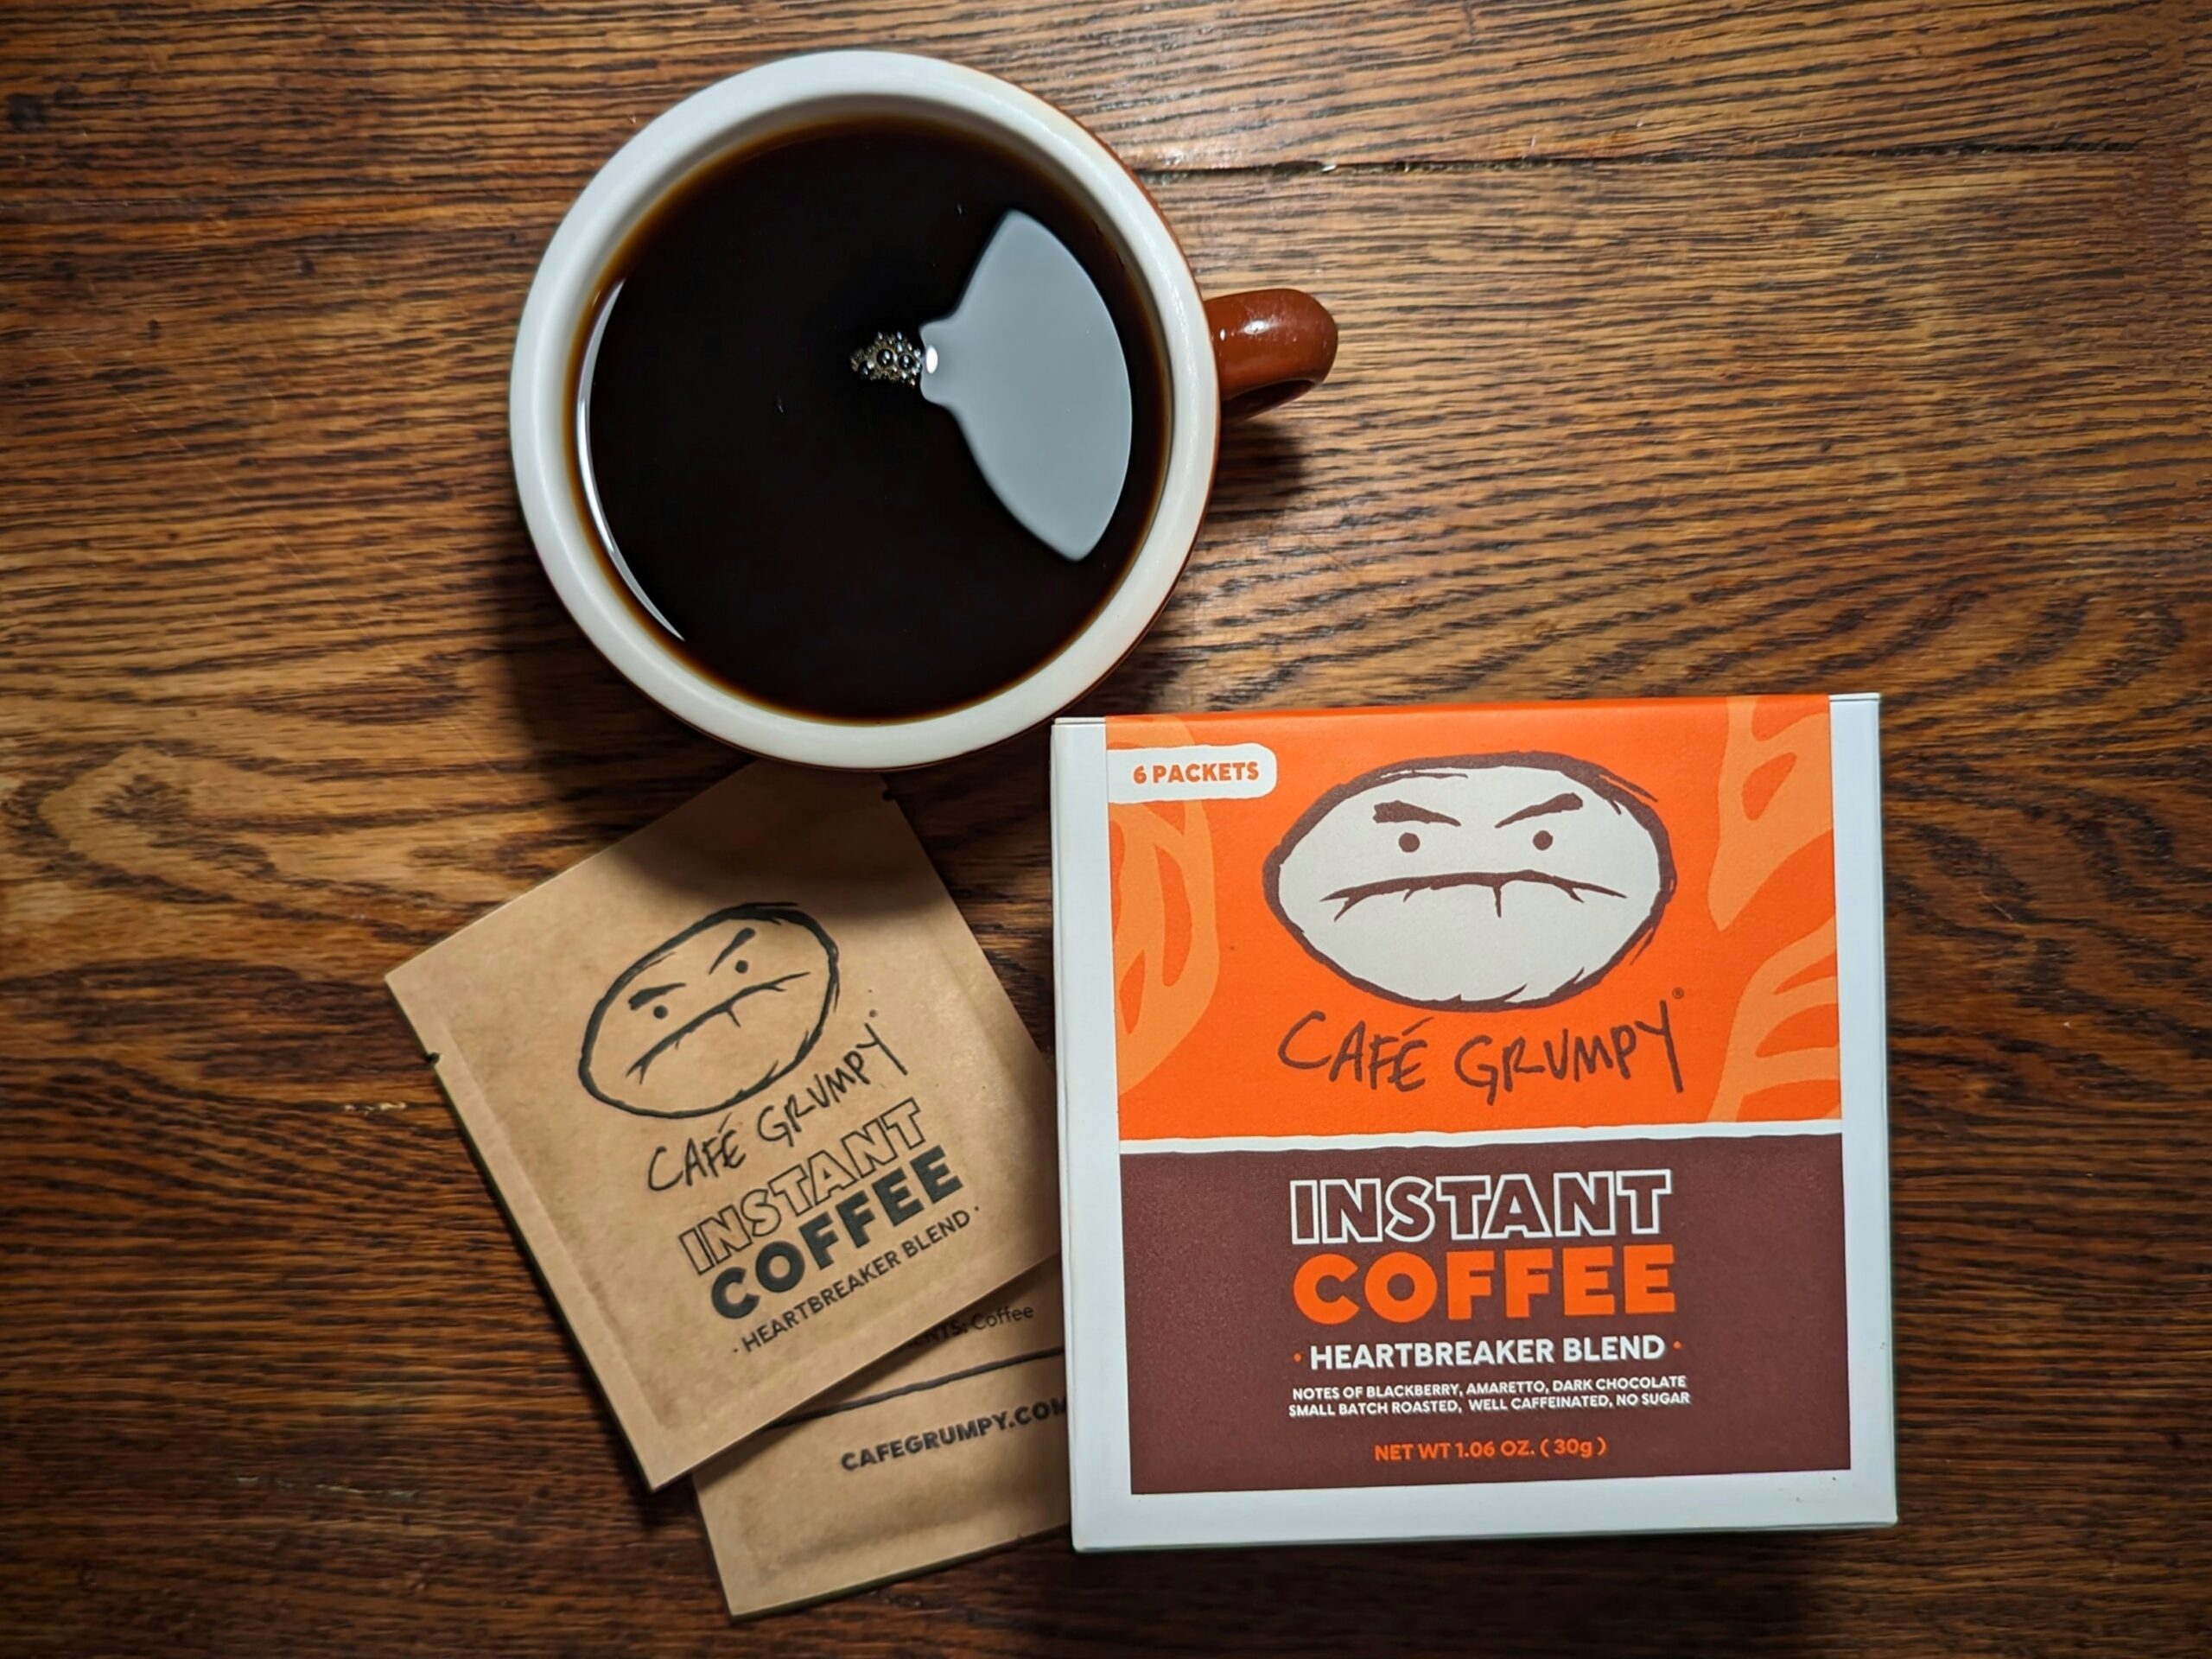 Cafe grumpy is in new york and miami. Get an unpretencious cup or brew one at home.